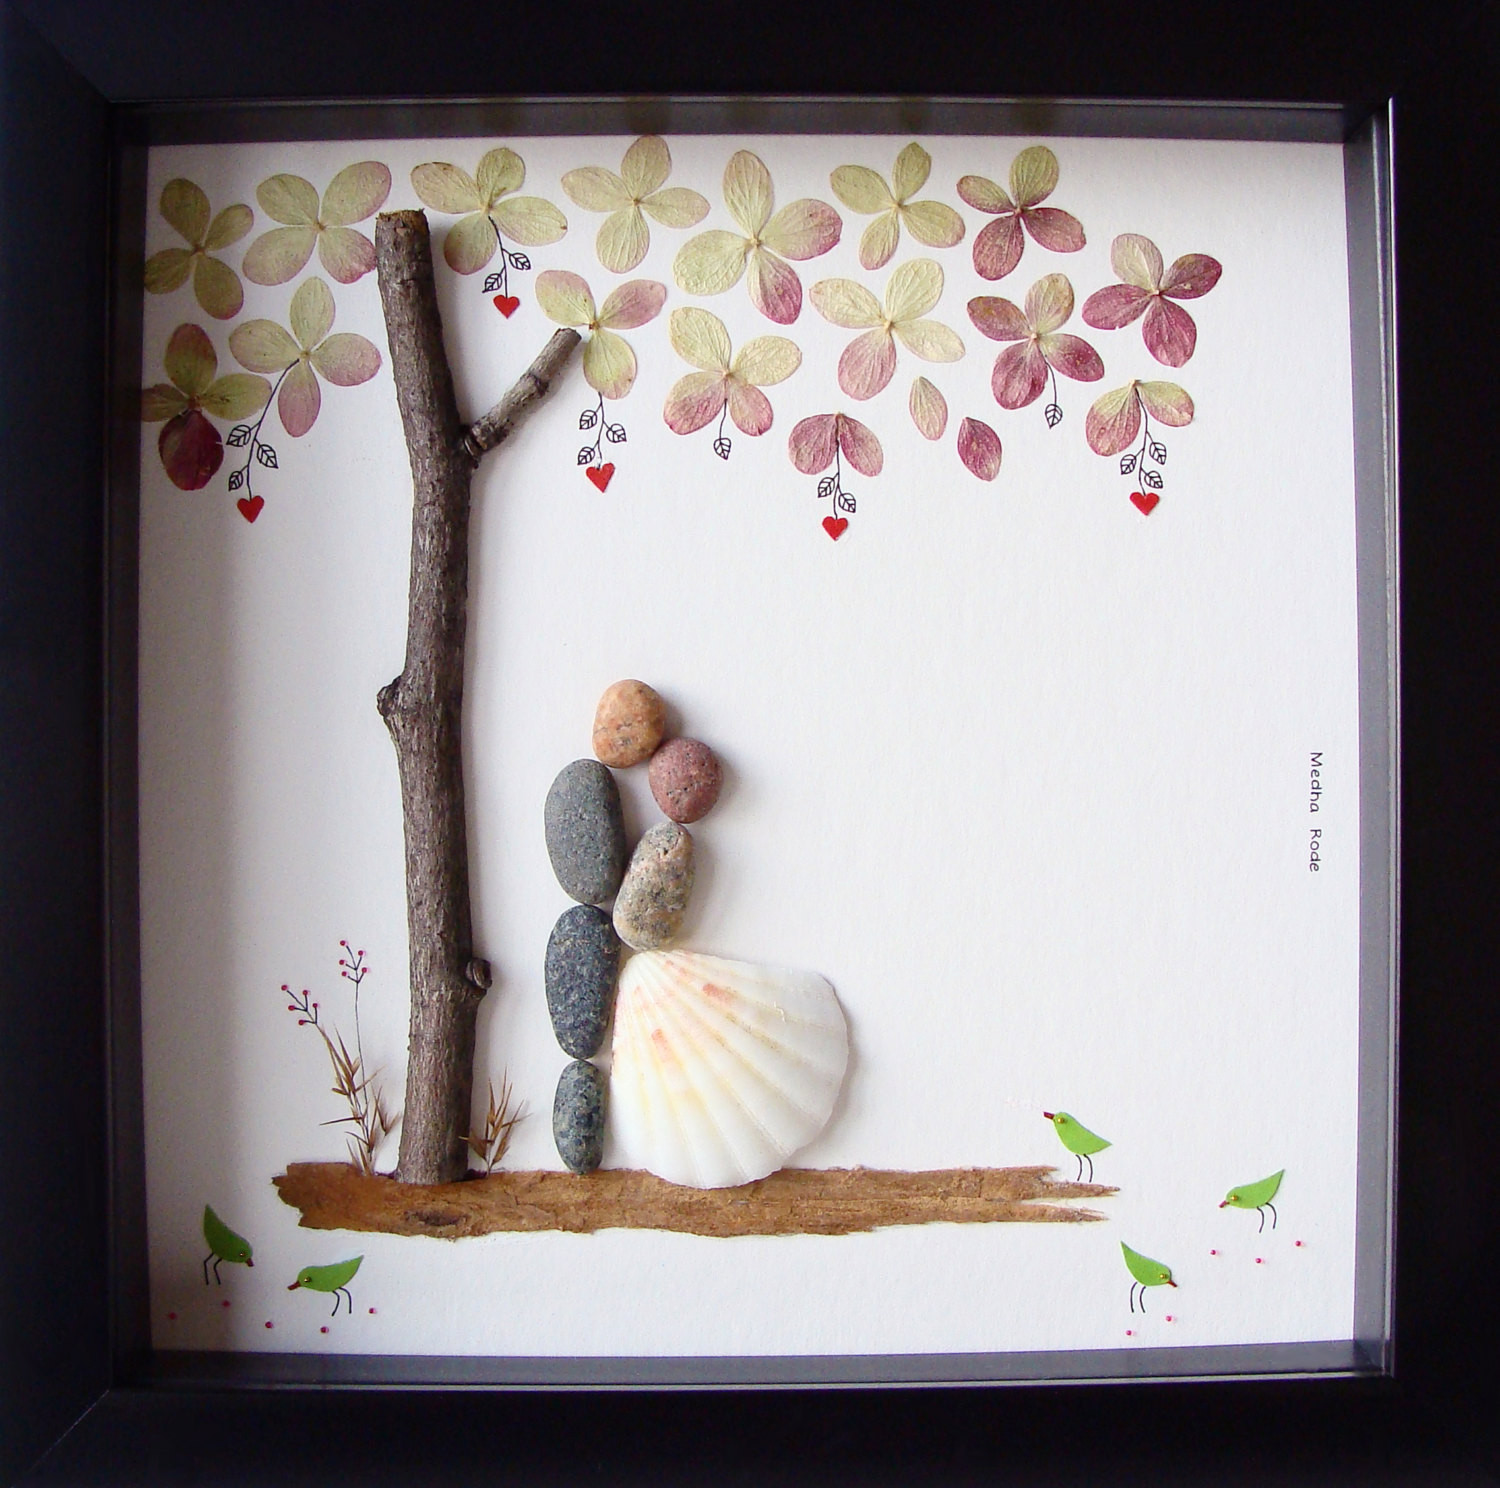 Gift Ideas For Engagement Couple
 Unique Wedding Gift For Couple Wedding Pebble Art by MedhaRode